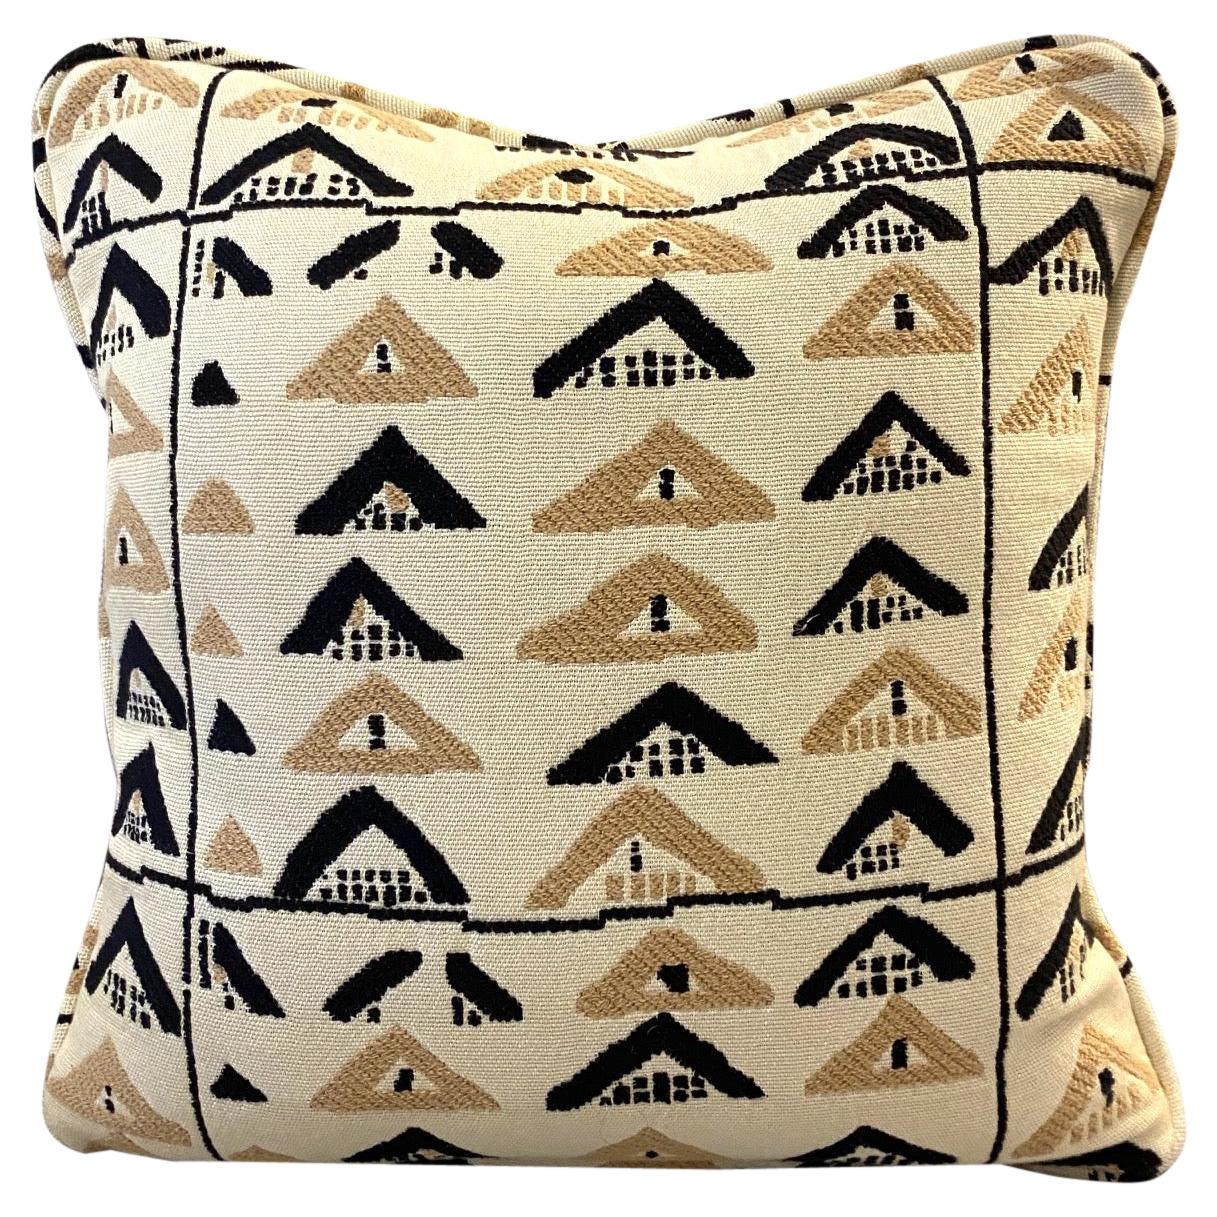 Pierre Frey Throw Pillow with Vintage African Kuba Print in Beige and Black